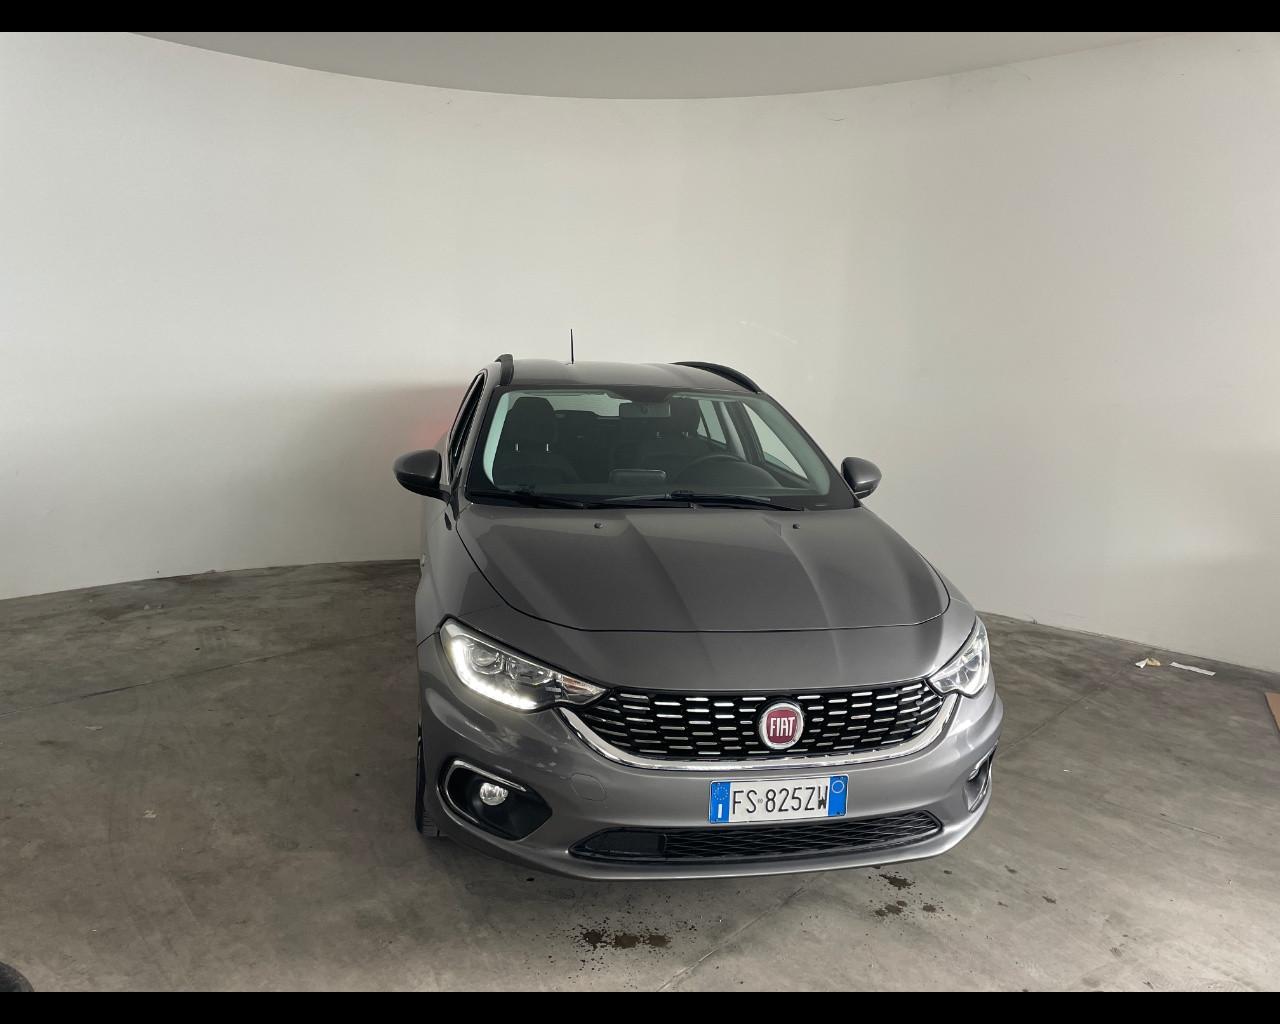 FIAT TIPO Tipo 1.6 Mjt S&S DCT SW Easy Business